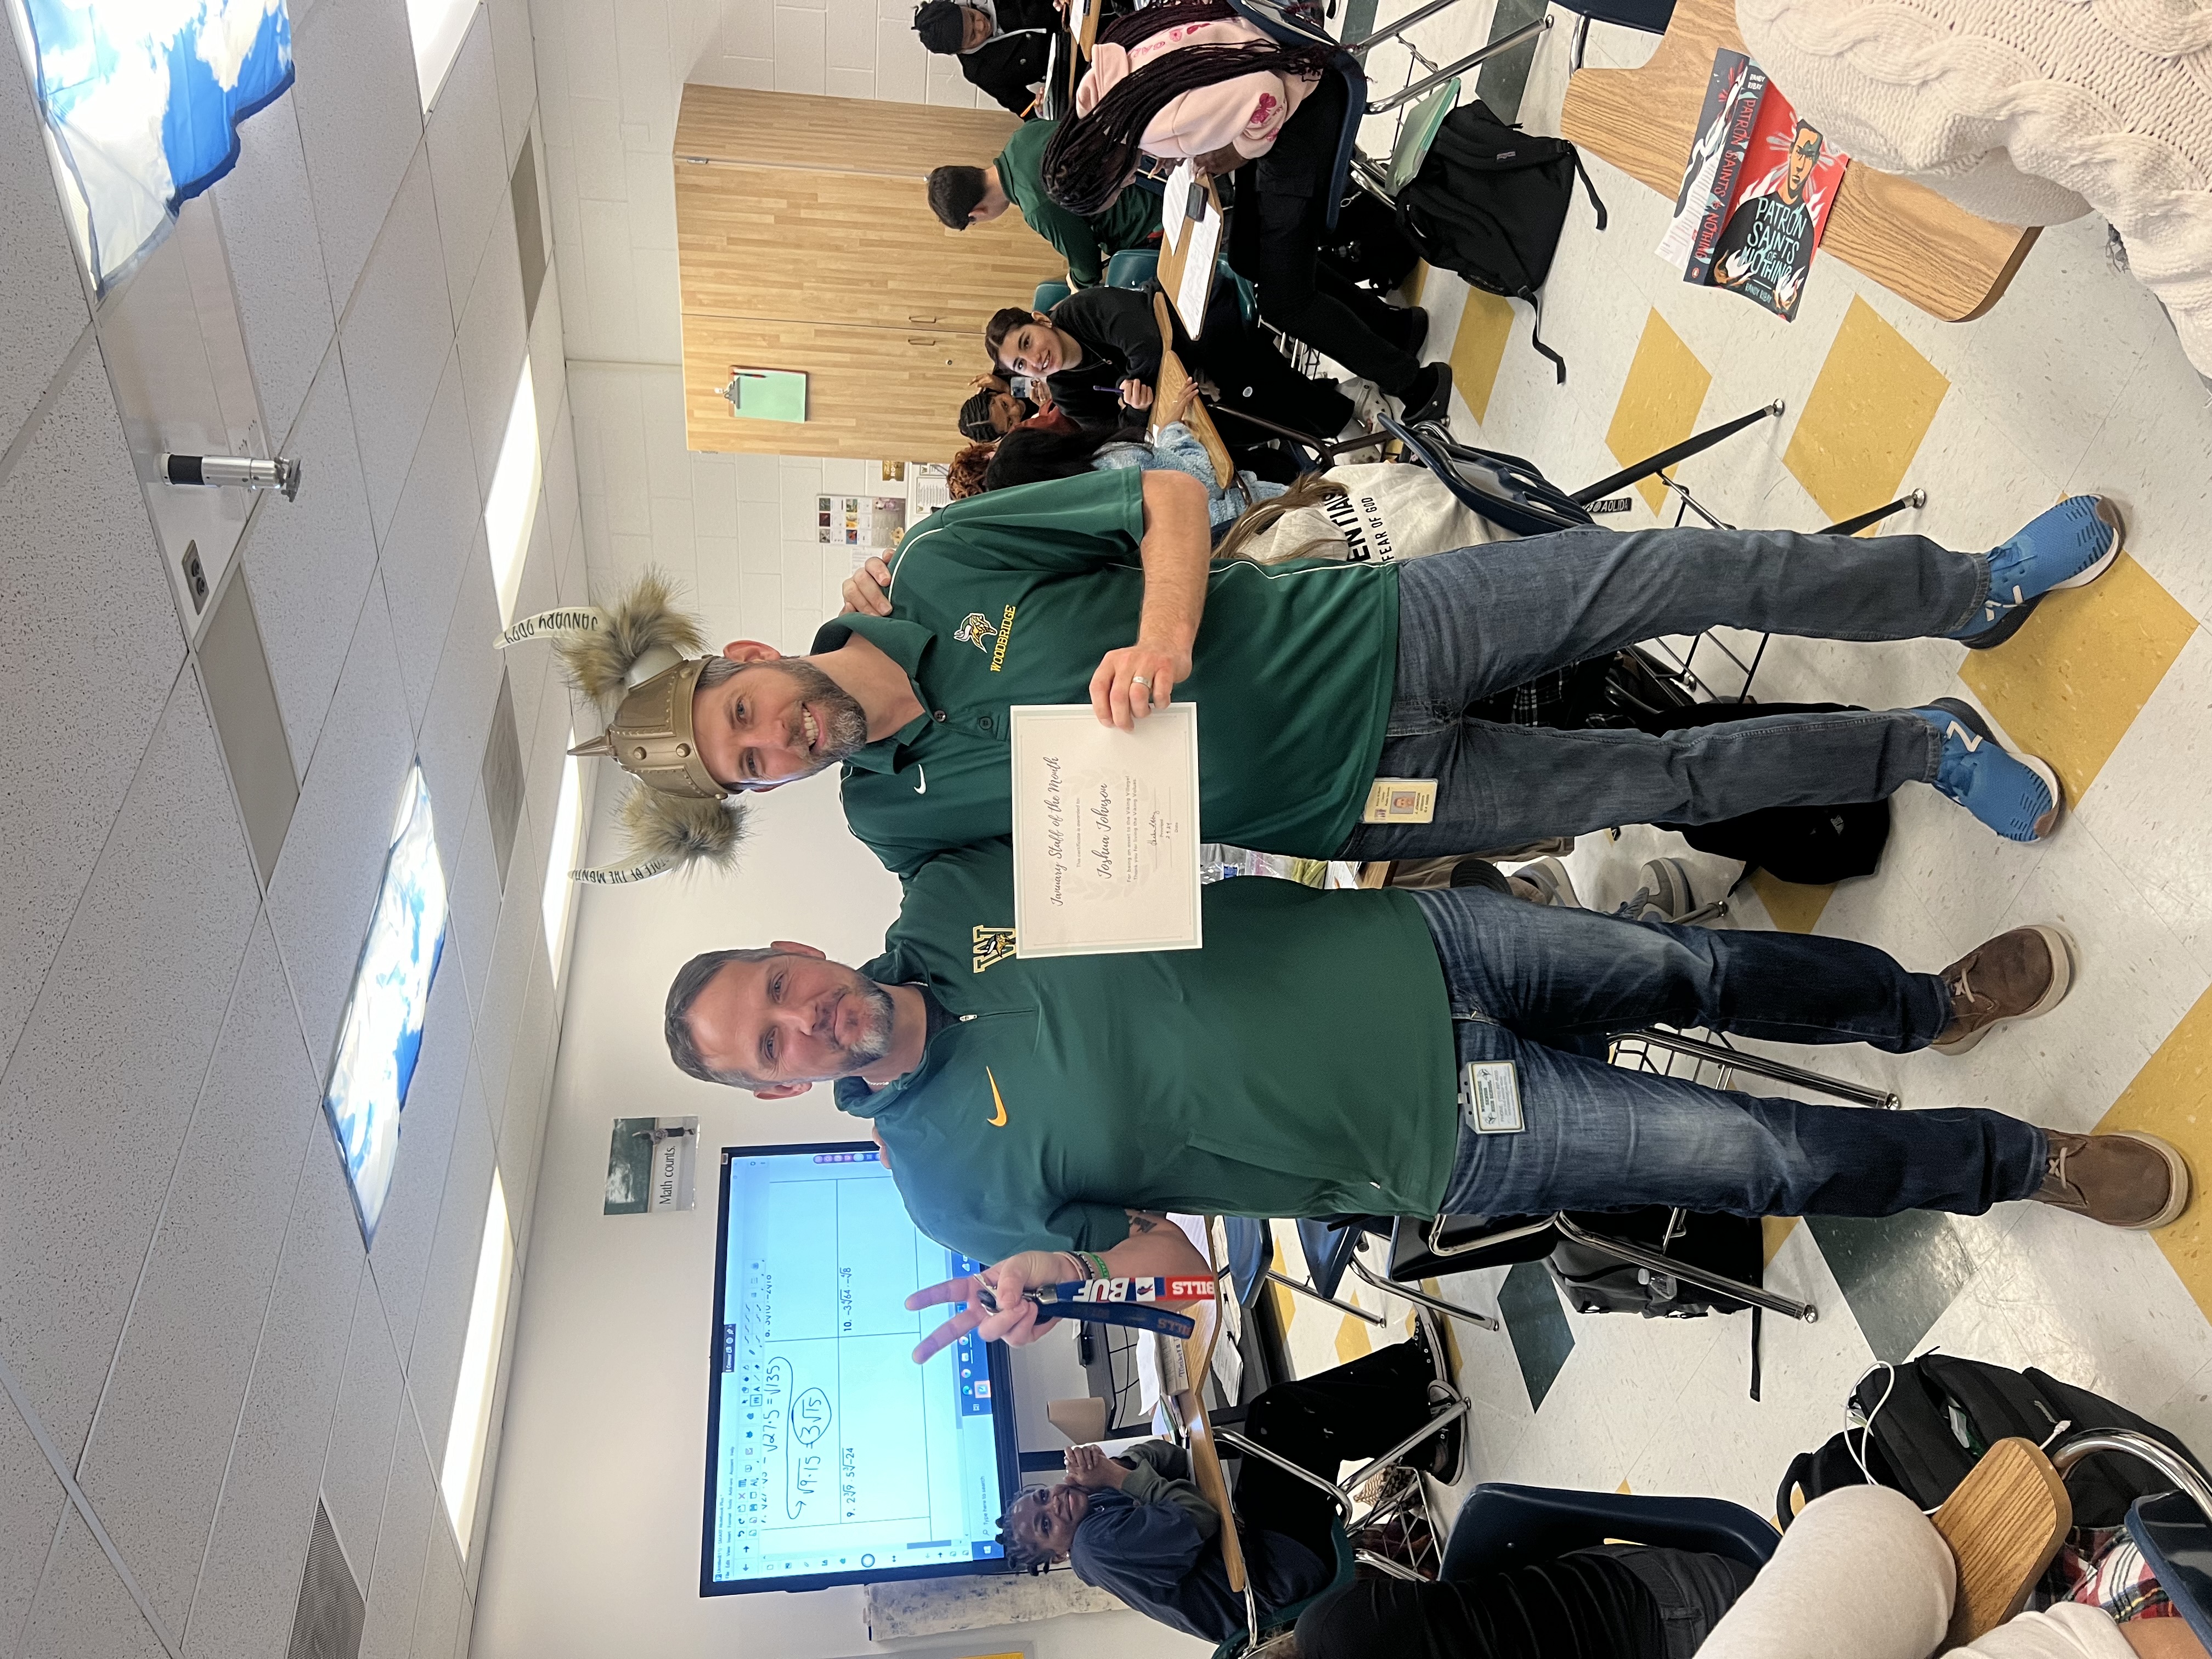 Mr. Johnson holding staff of the month award